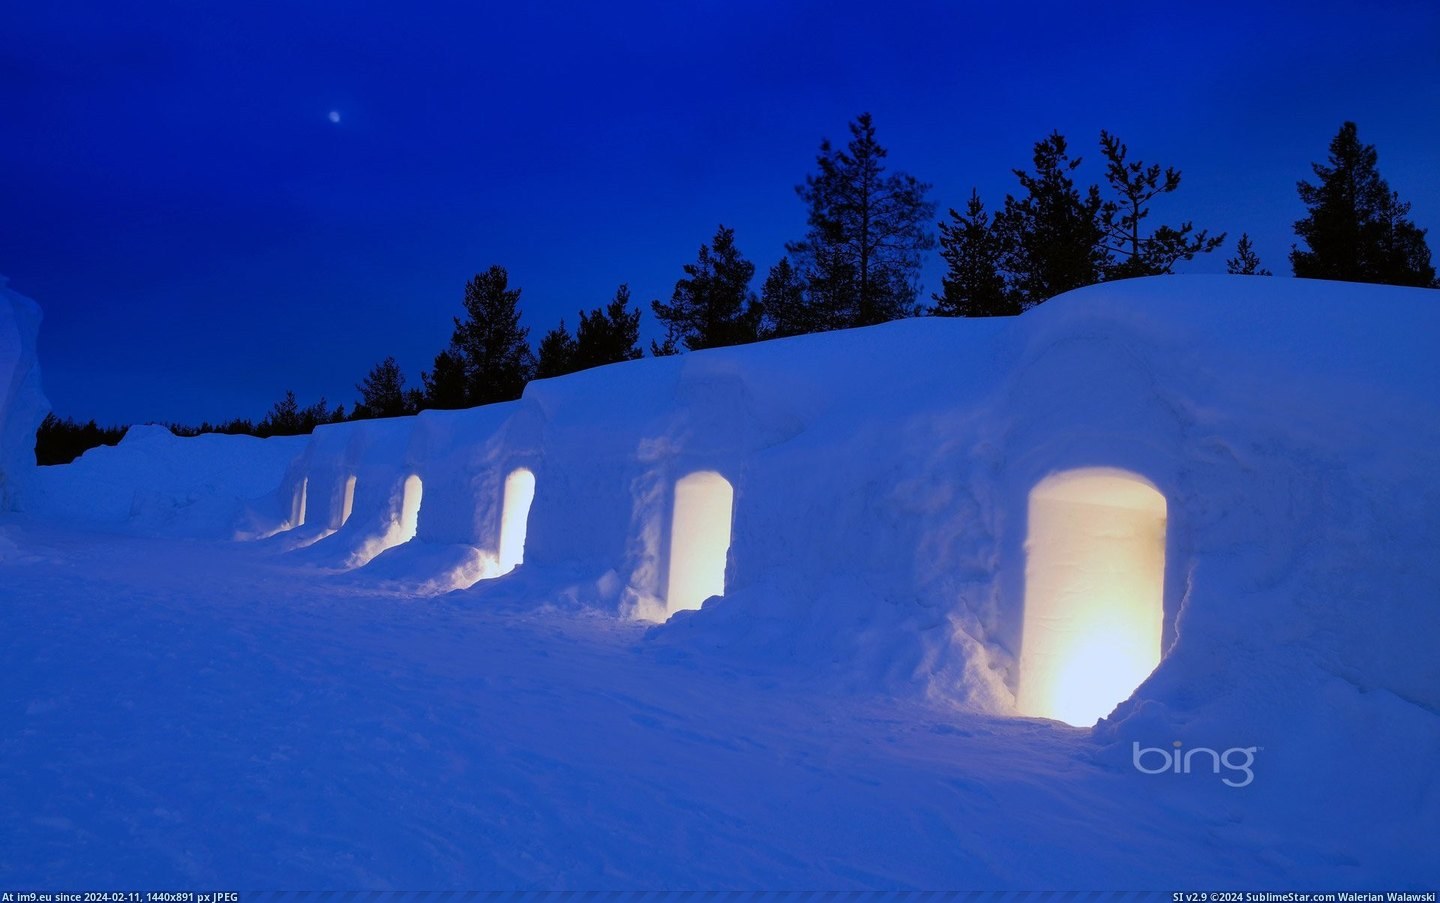 Illuminated igloo, Kakslauttanen, Lapland, Finland (©Arctic-Images - Iconica - Getty Images) (in Best photos of January 2013)